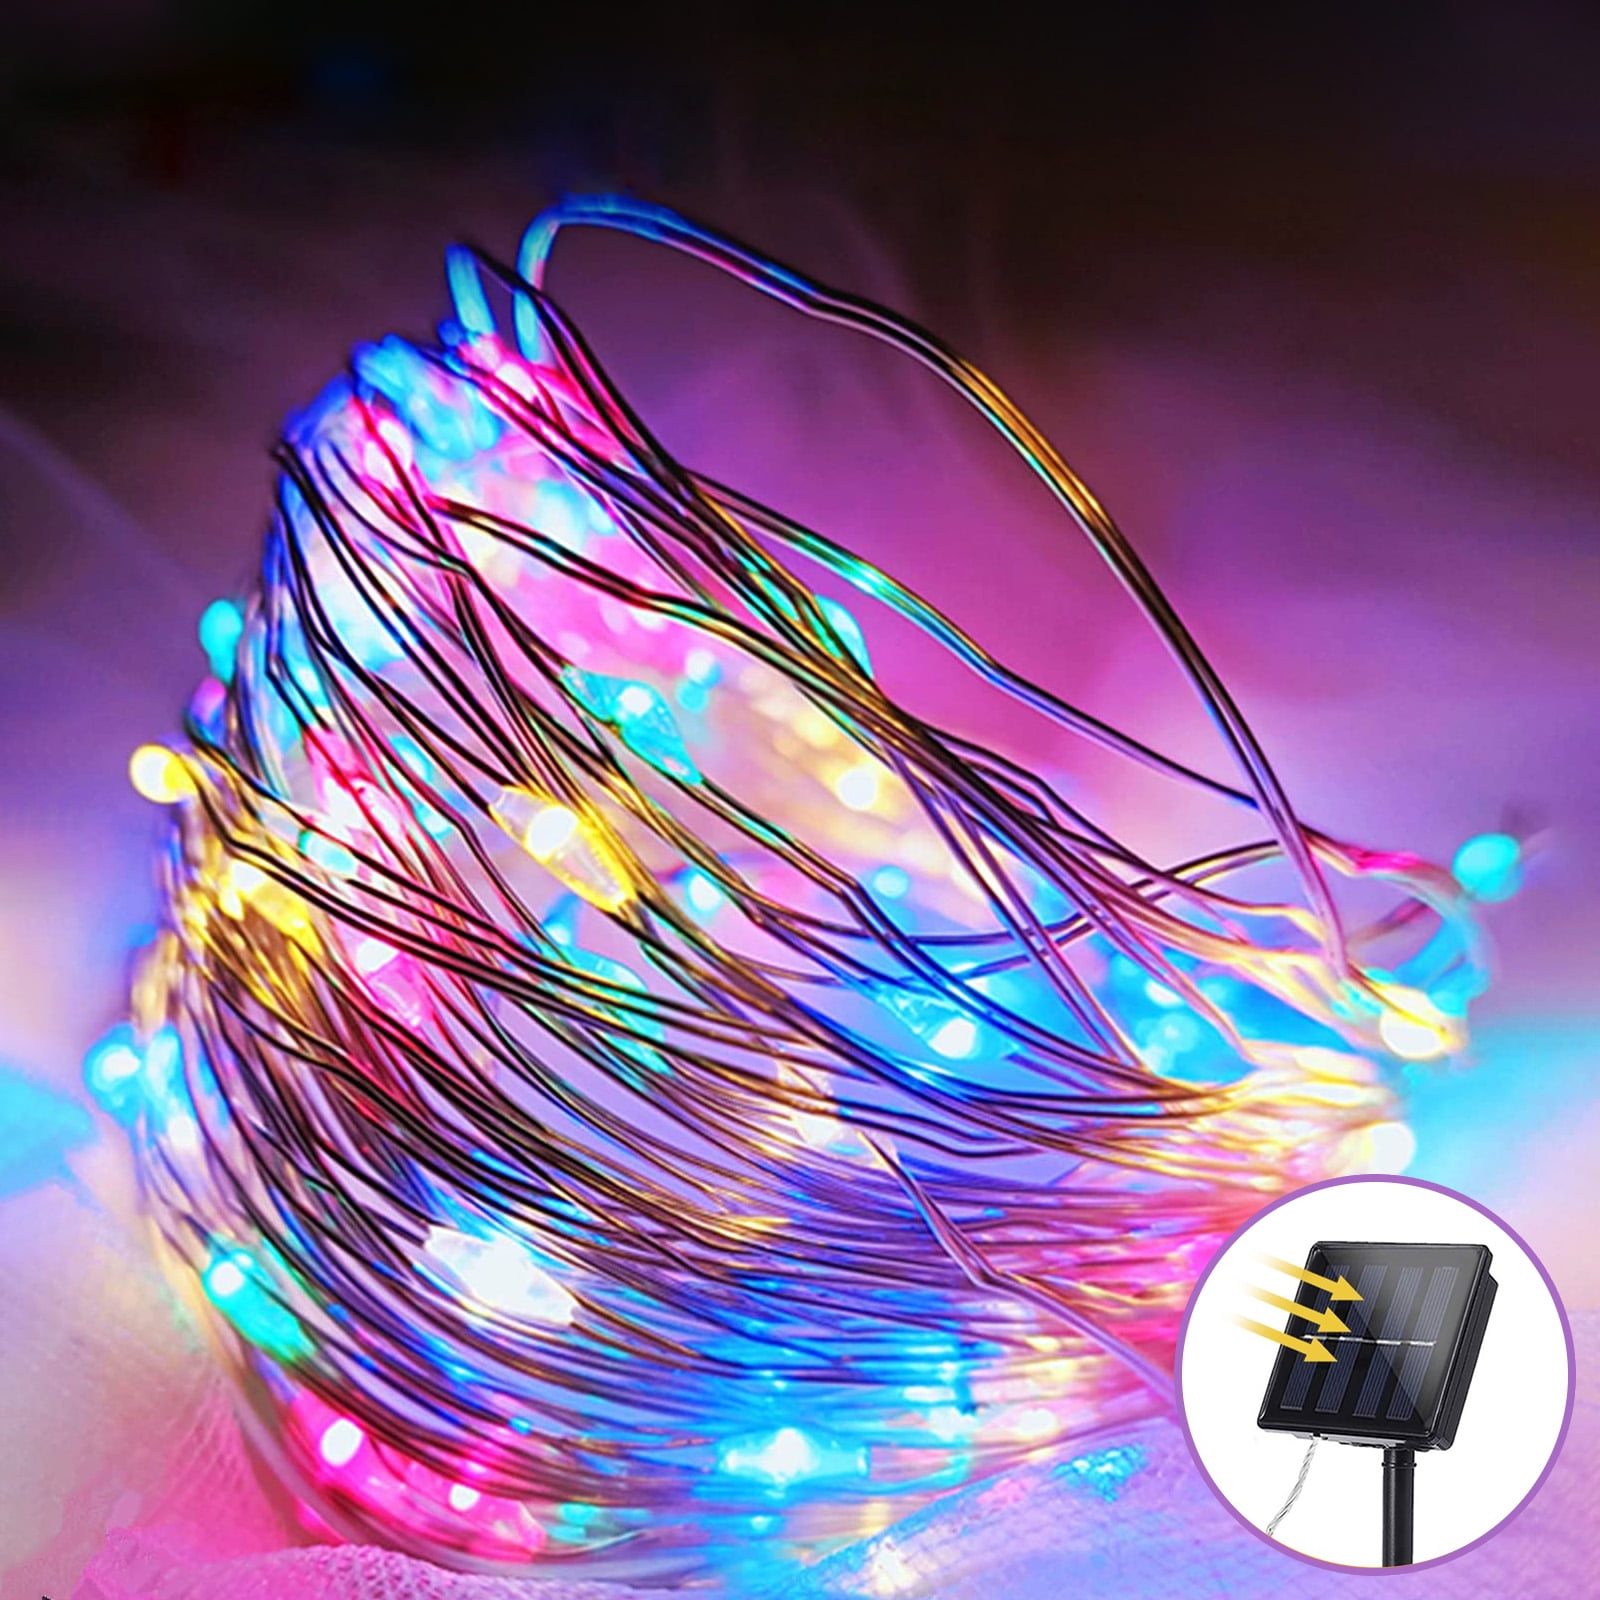 8 Modes Copper Wire Lights Waterproof Nautical Starry String Lights for Patio Christmas Wedding Outdoor Party Decoration Vine String Lights Teepao 33ft 100 LED Fairy Solar String Lights Multi Color 